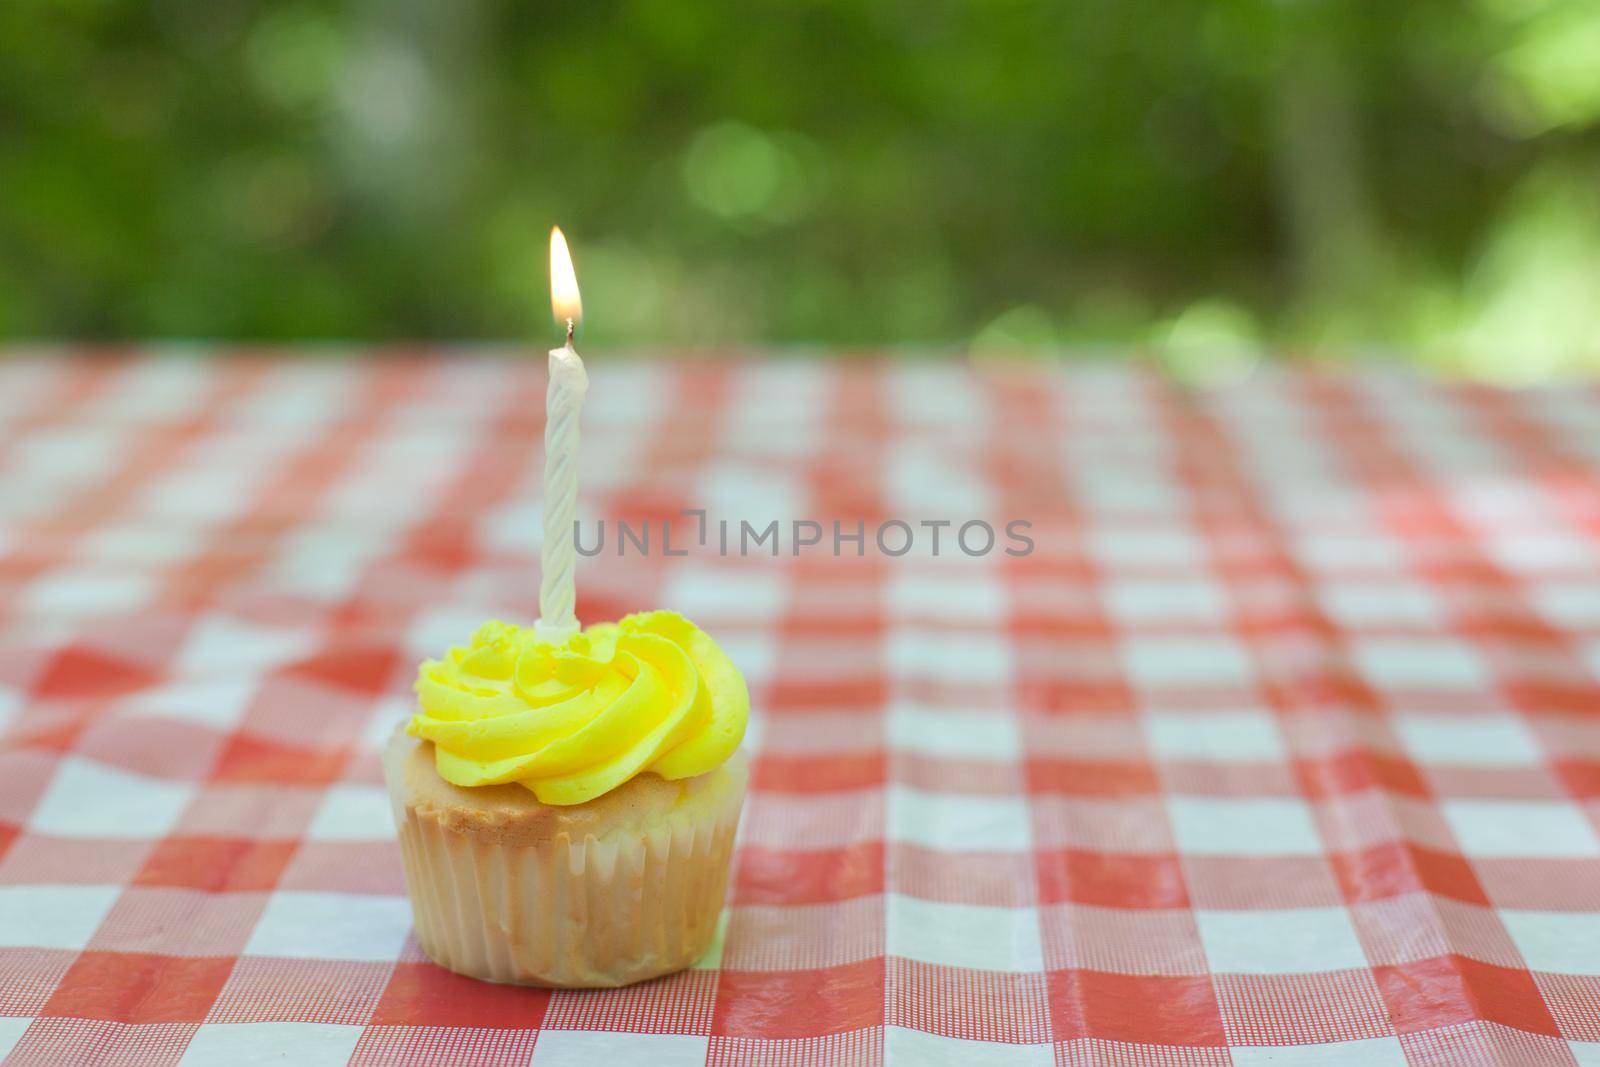  A birthday or celebration with a little cupcake and yellow icing sitting on a checkered picnic table cloth 